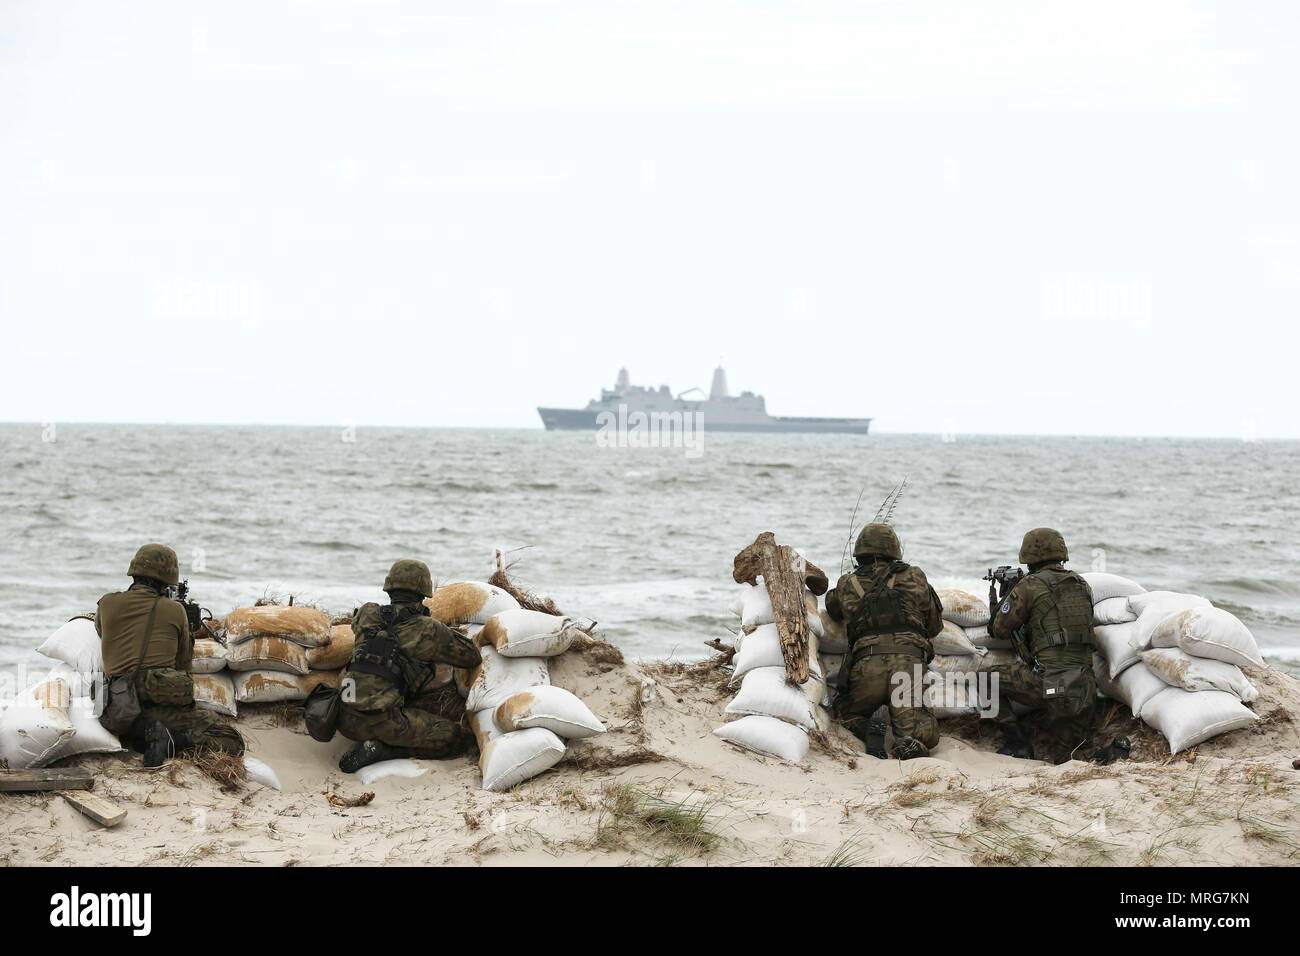 170614-N-PF515-003  USTKA, Poland (June 14, 2017) Polish sailors participate in an amphibious landing demonstration during exercise BALTOPS 2017. The premier annual maritime-focused exercise is conducted in the Baltic region and is one of the largest exercises in Northern Europe.  (U.S. Navy photo by Chief Mass Communication Specialist America A. Henry/Released) Stock Photo